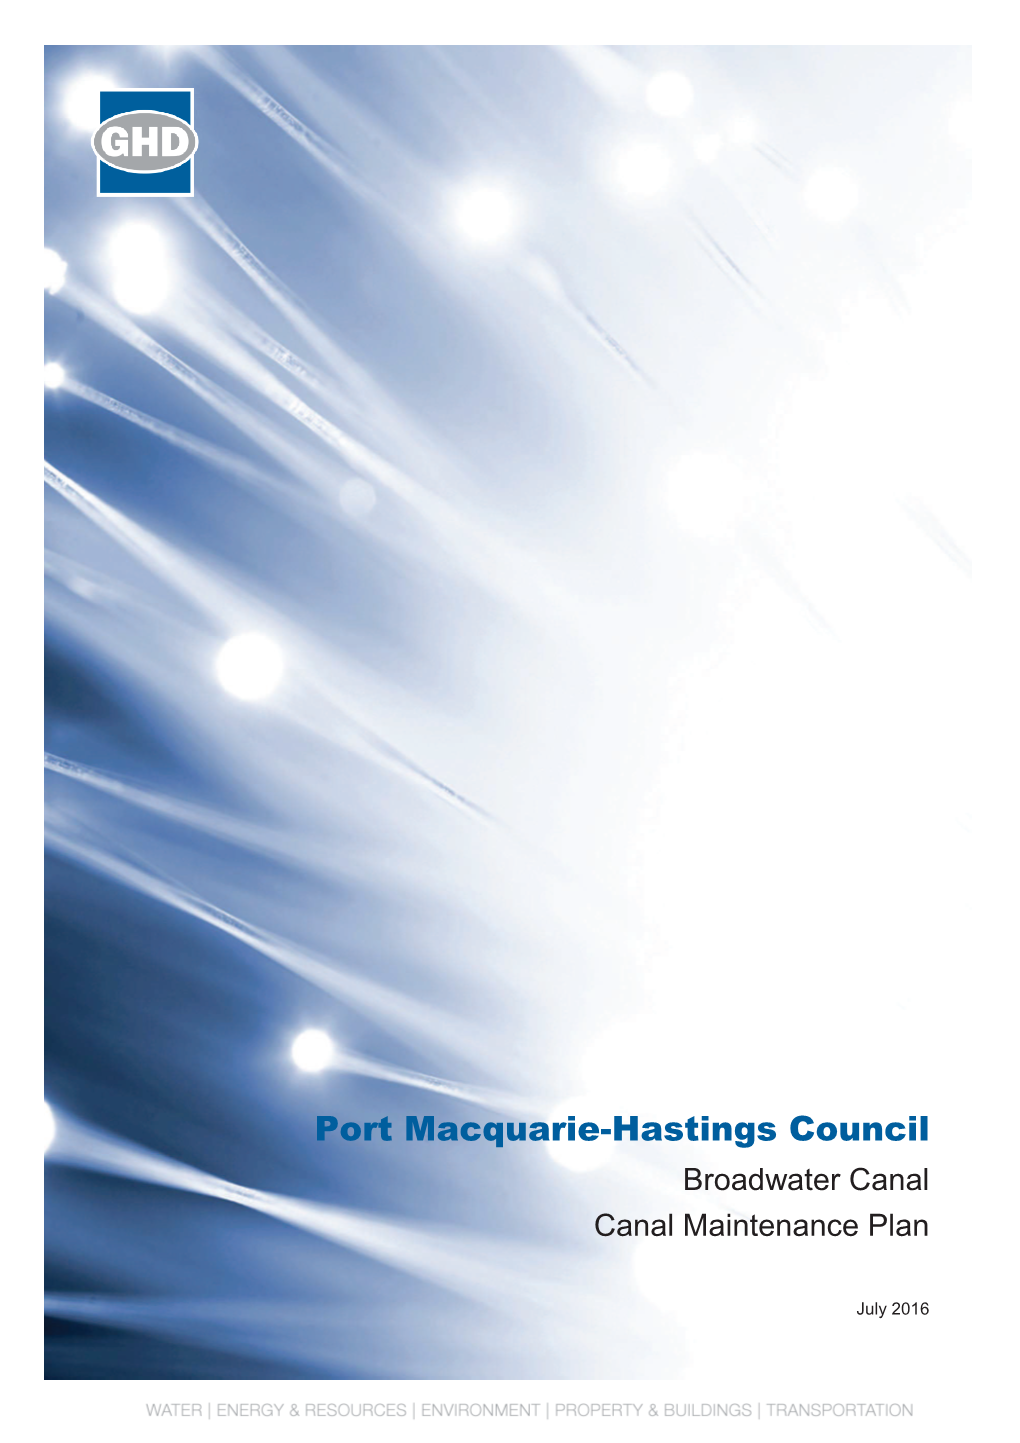 Port Macquarie-Hastings Council Broadwater Canal Canal Maintenance Plan